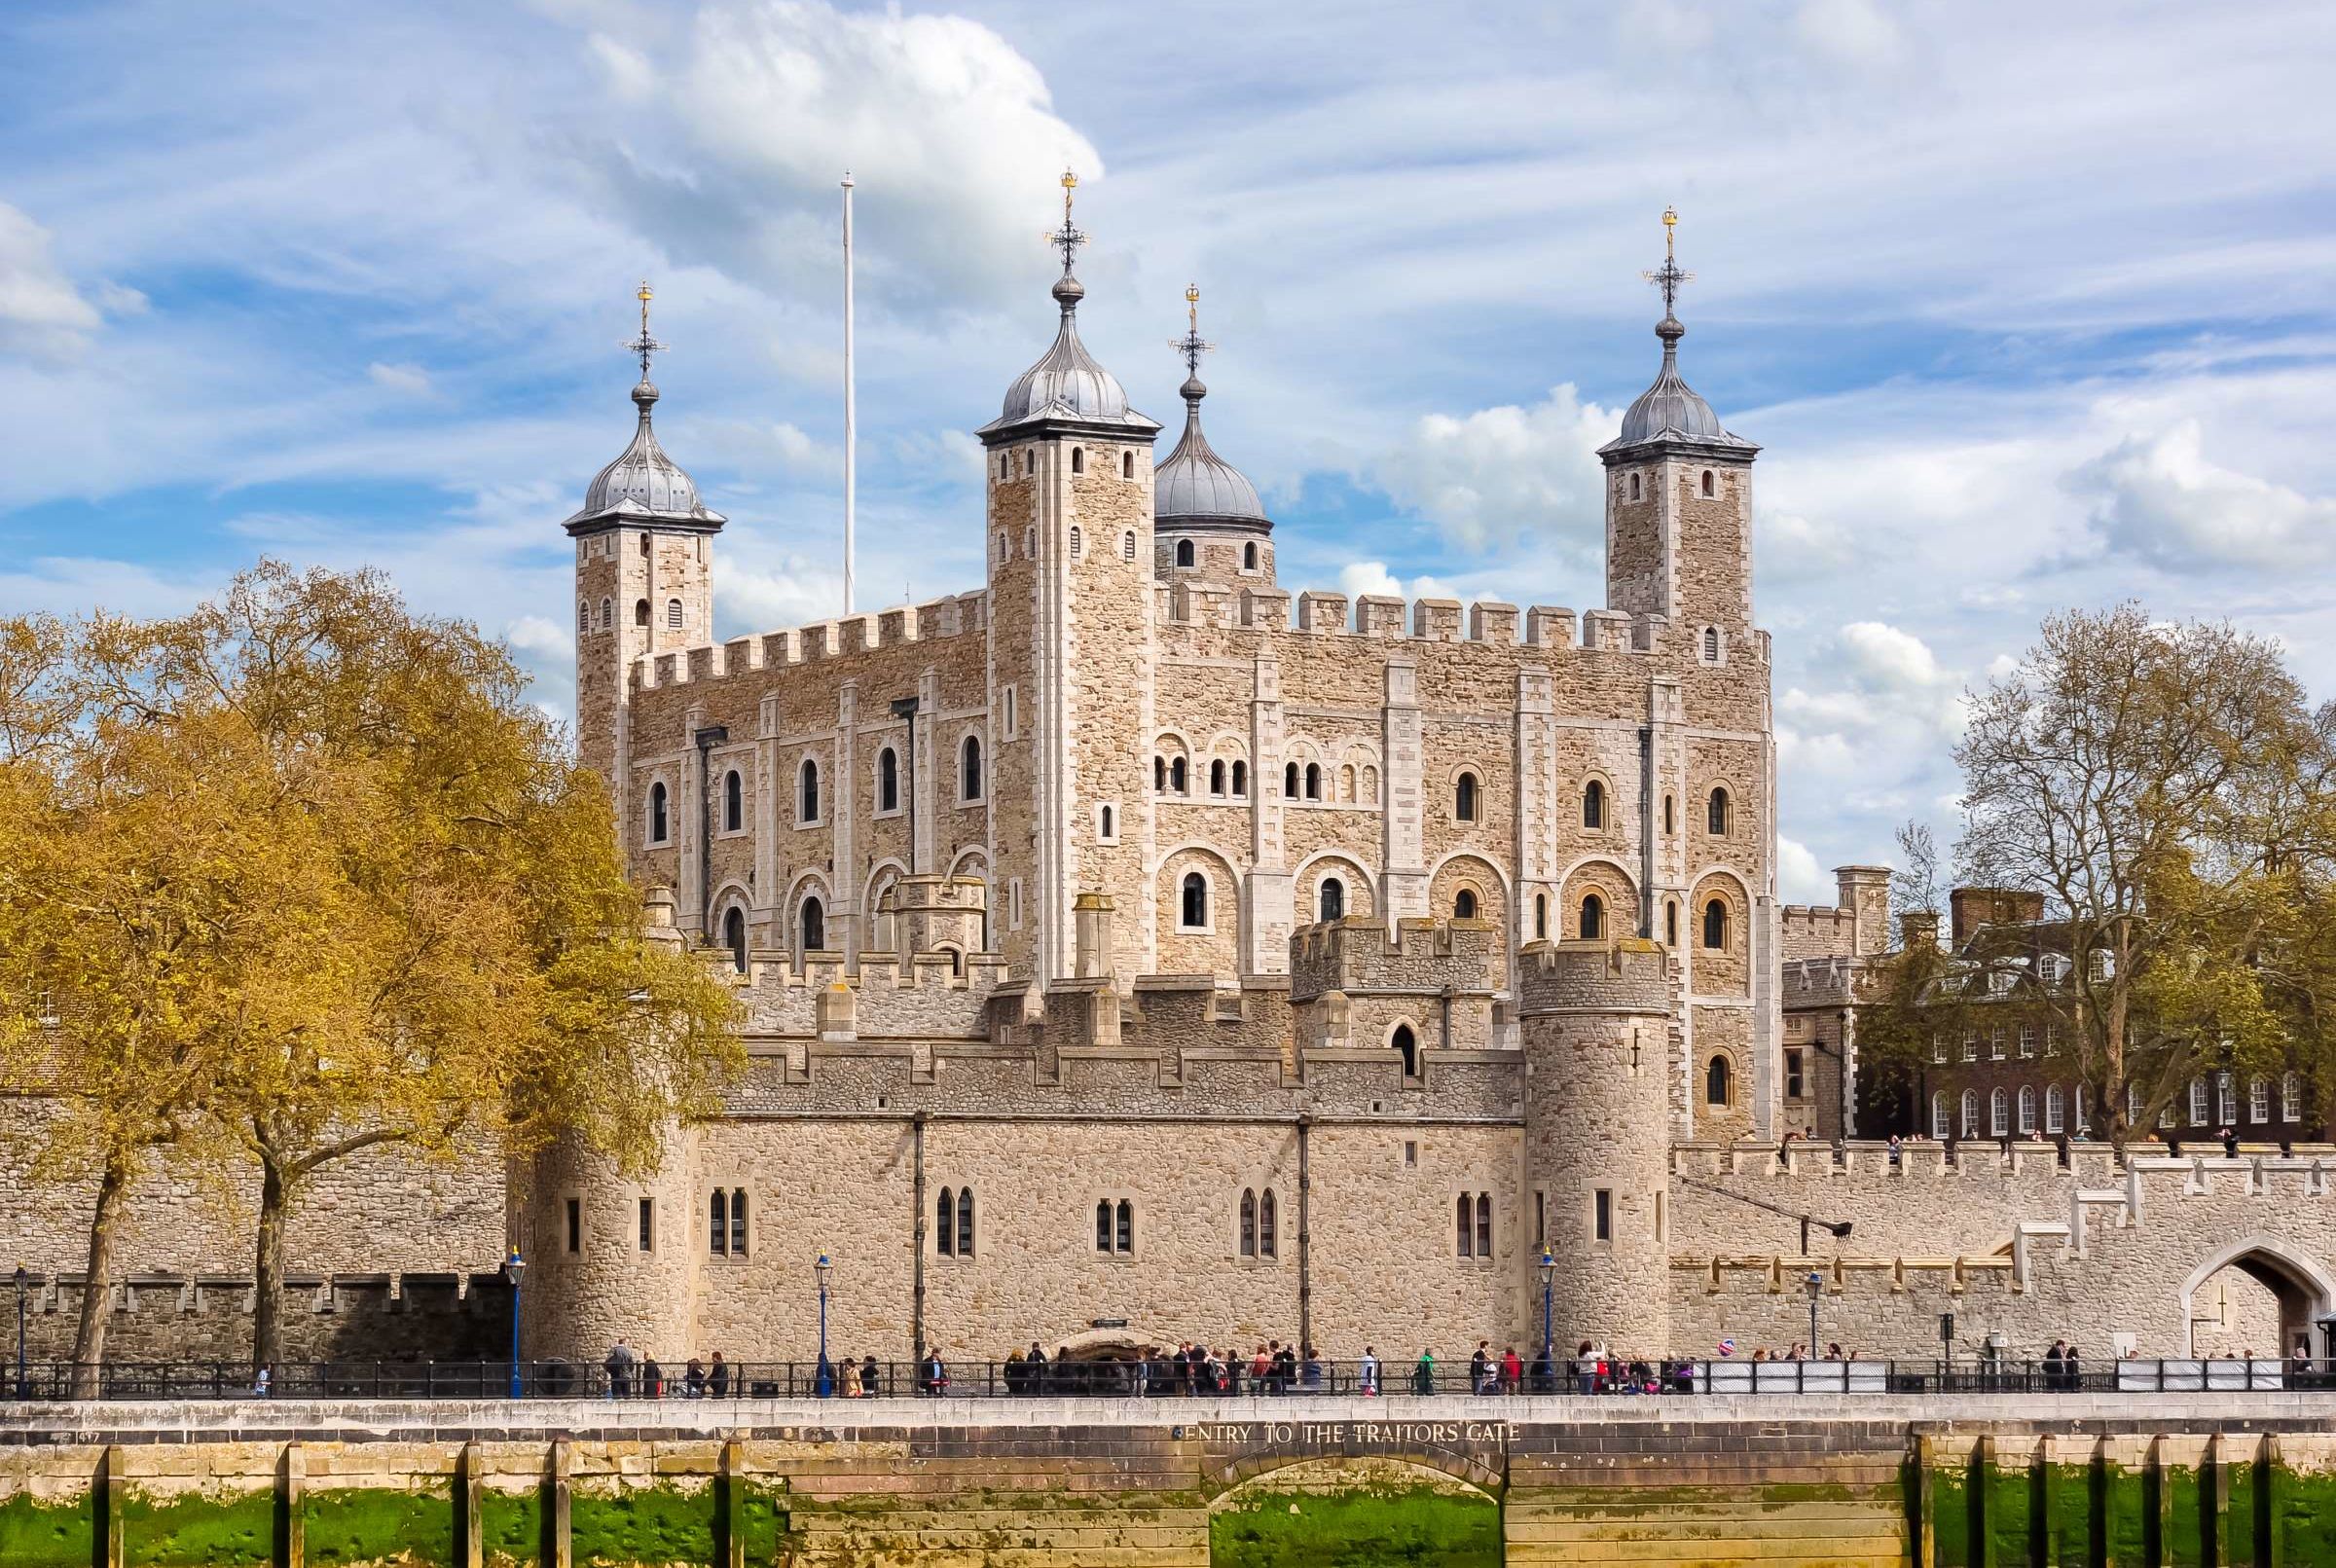 Tower Of London Facts Mental Floss